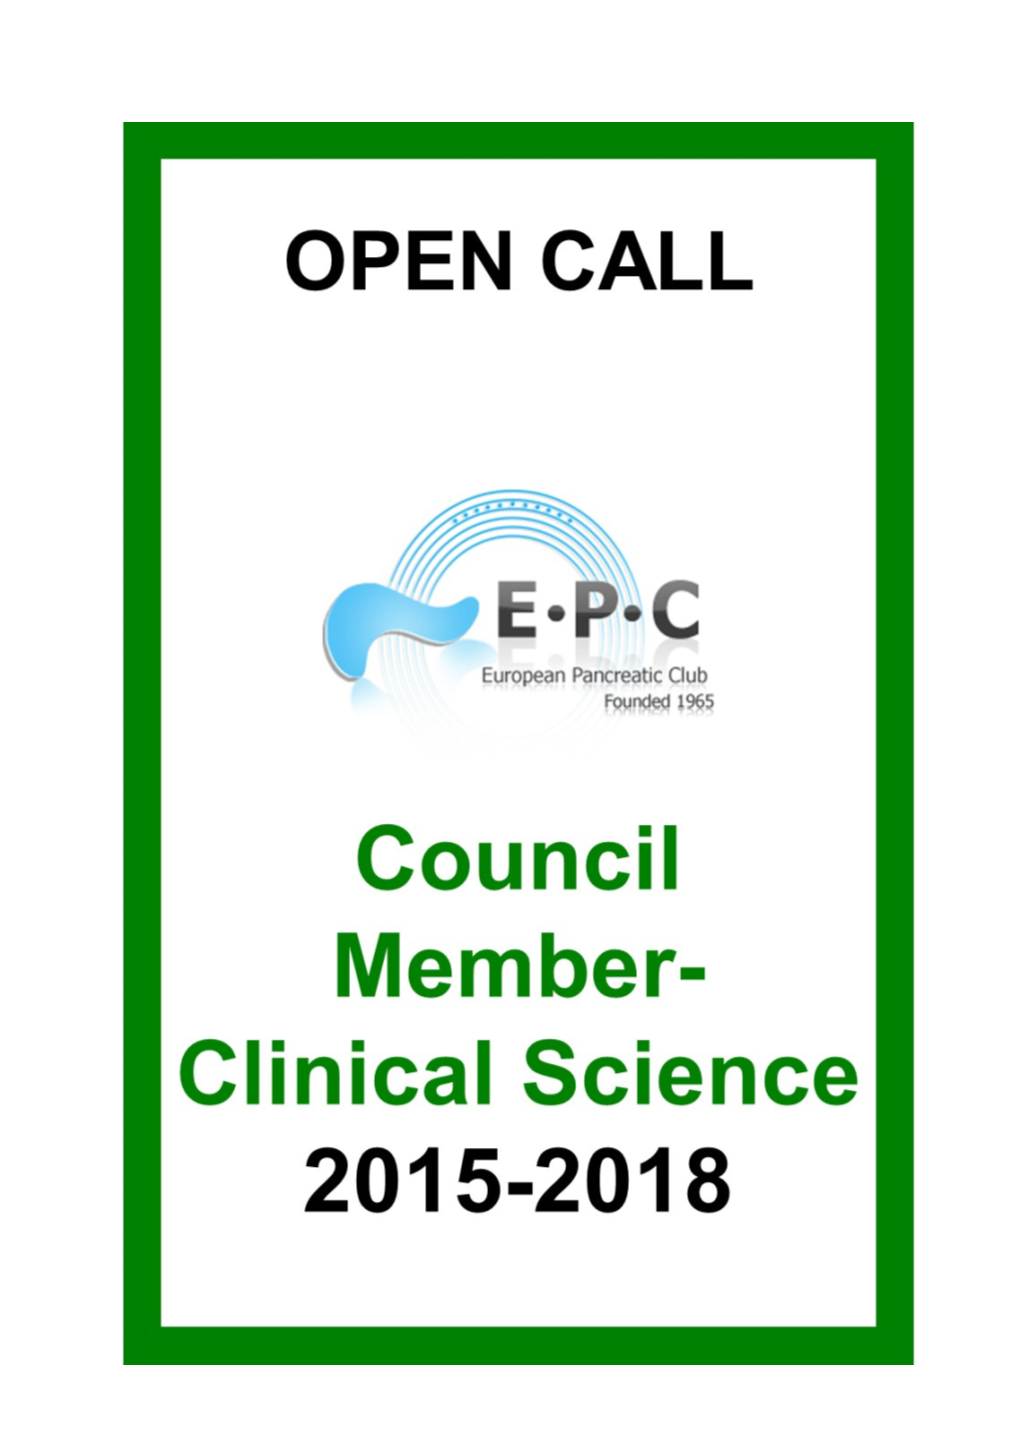 For General Councillor (Representing Clinical Science) of the European Pancreatic Club (EPC)